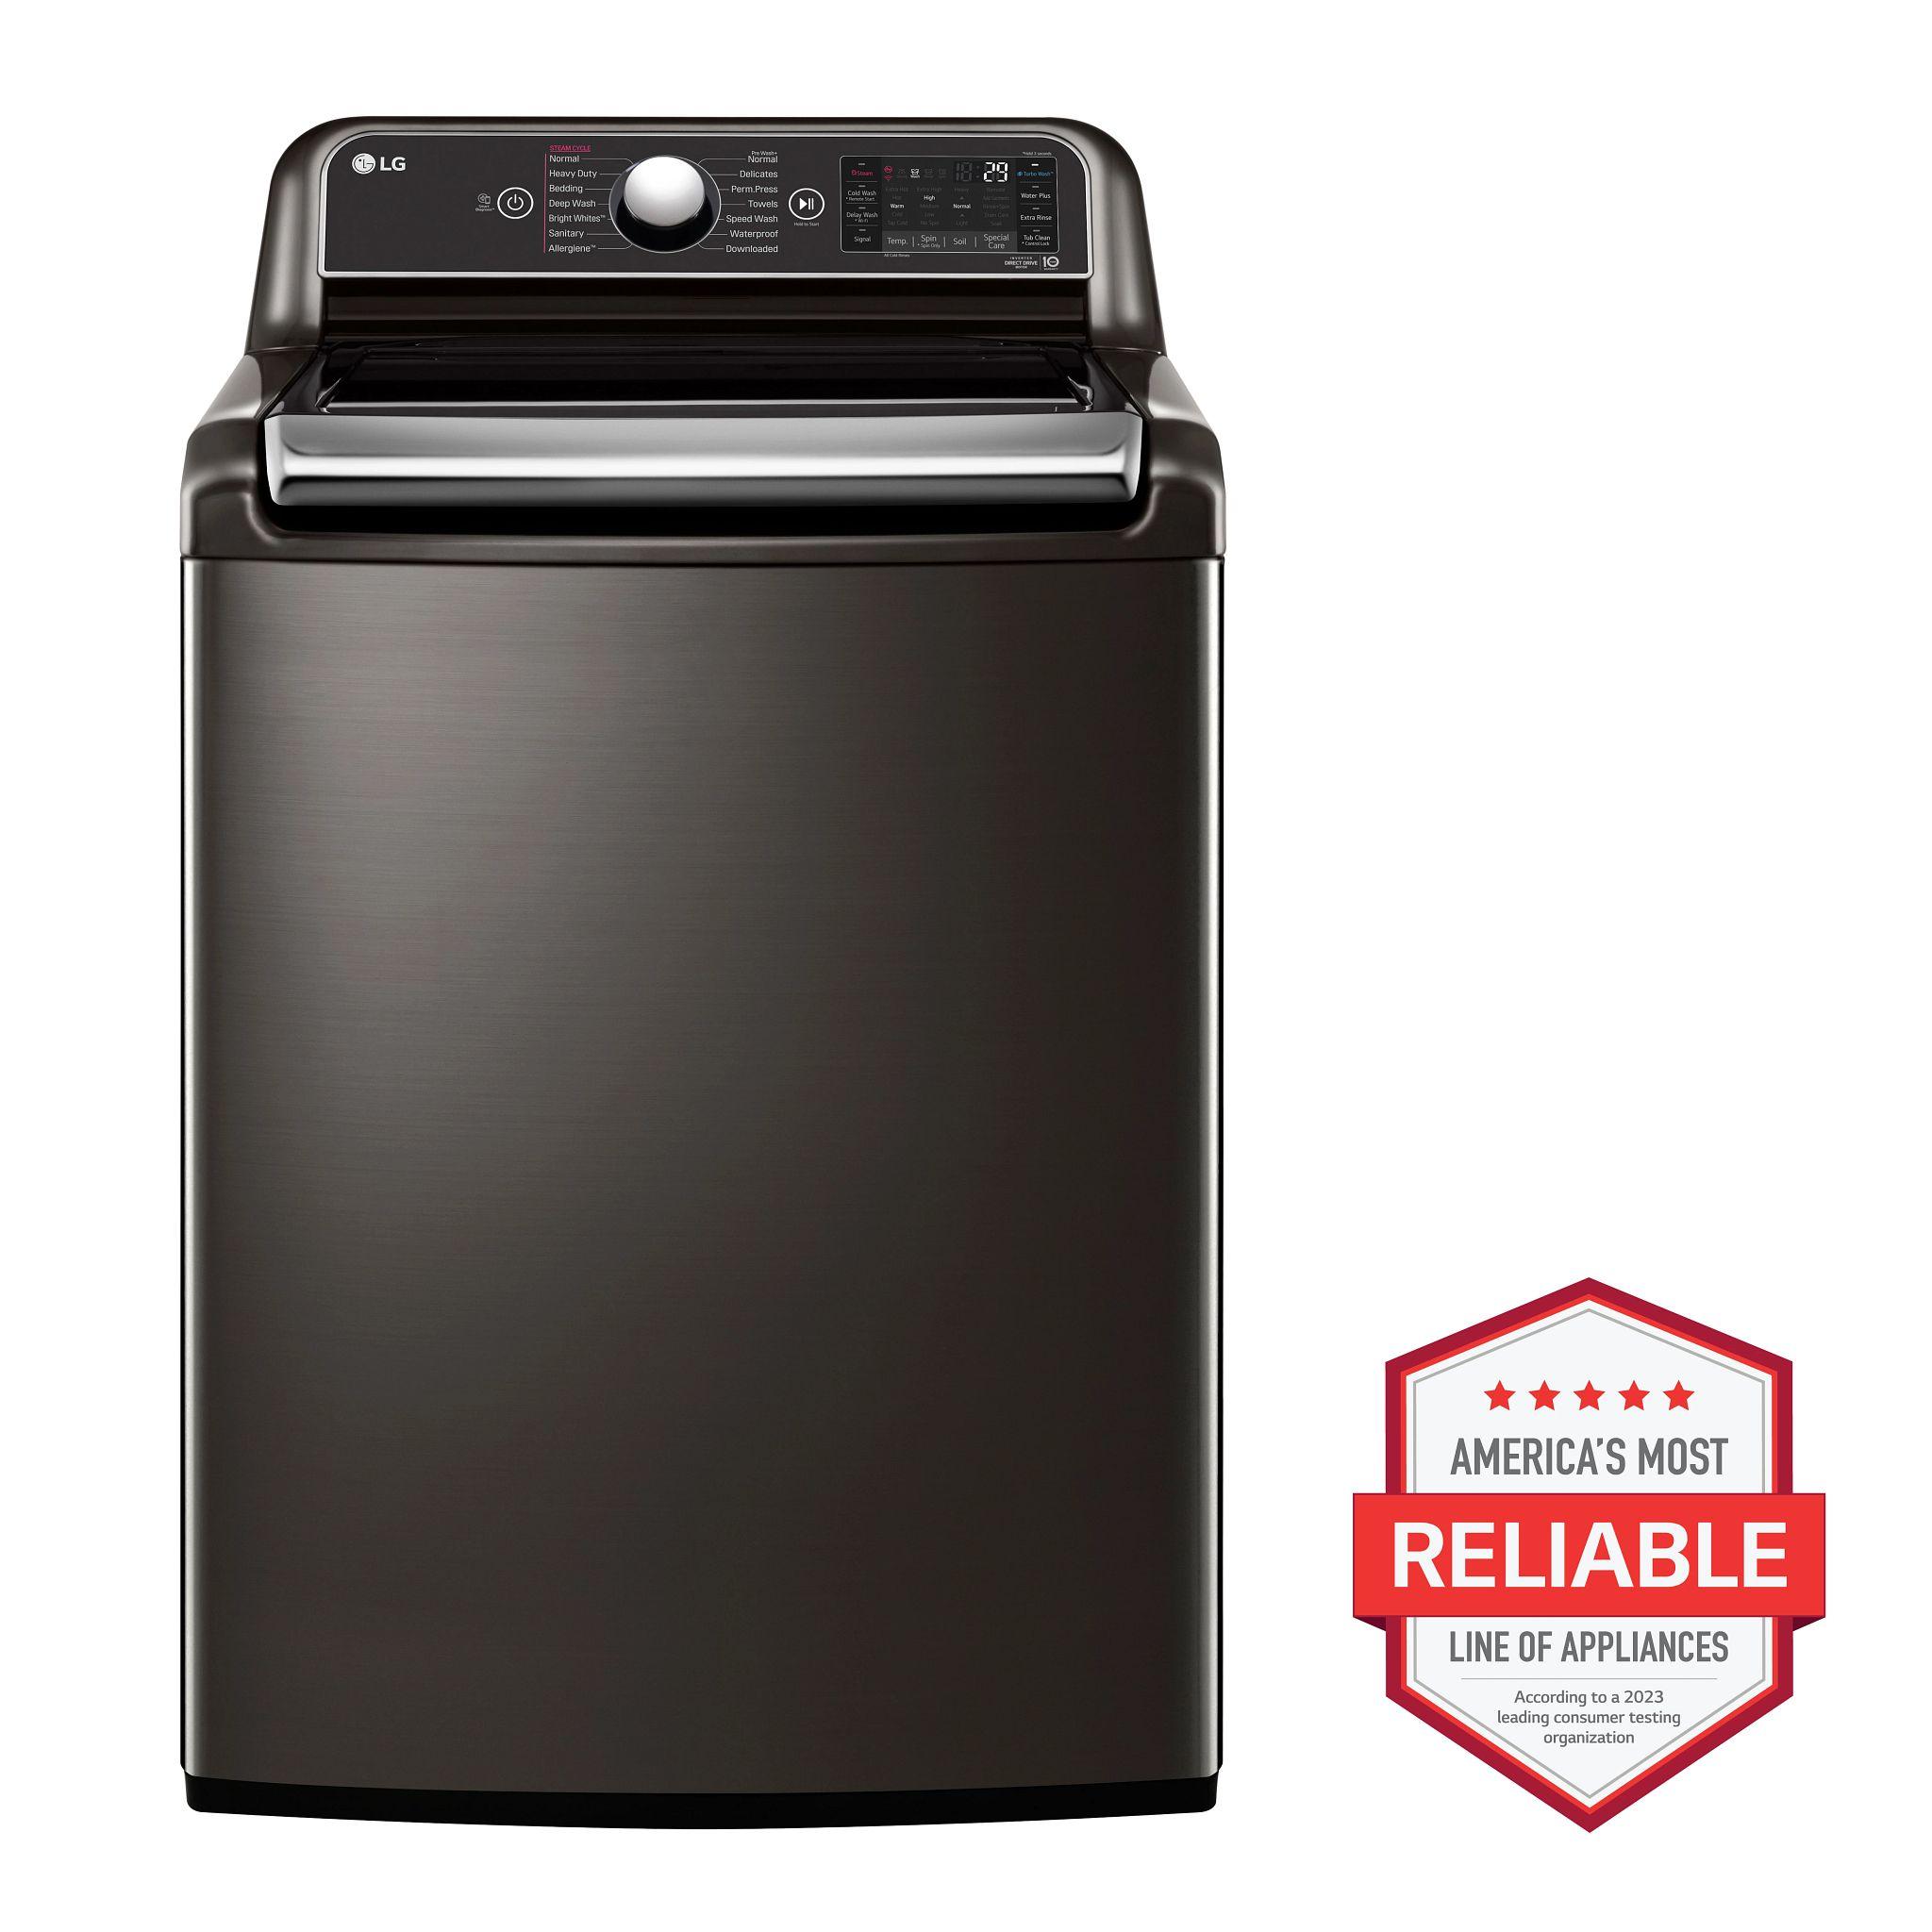 LG Appliances 5.5 cu.ft. Smart wi-fi Enabled Top Load Washer with TurboWash3D™ Technology